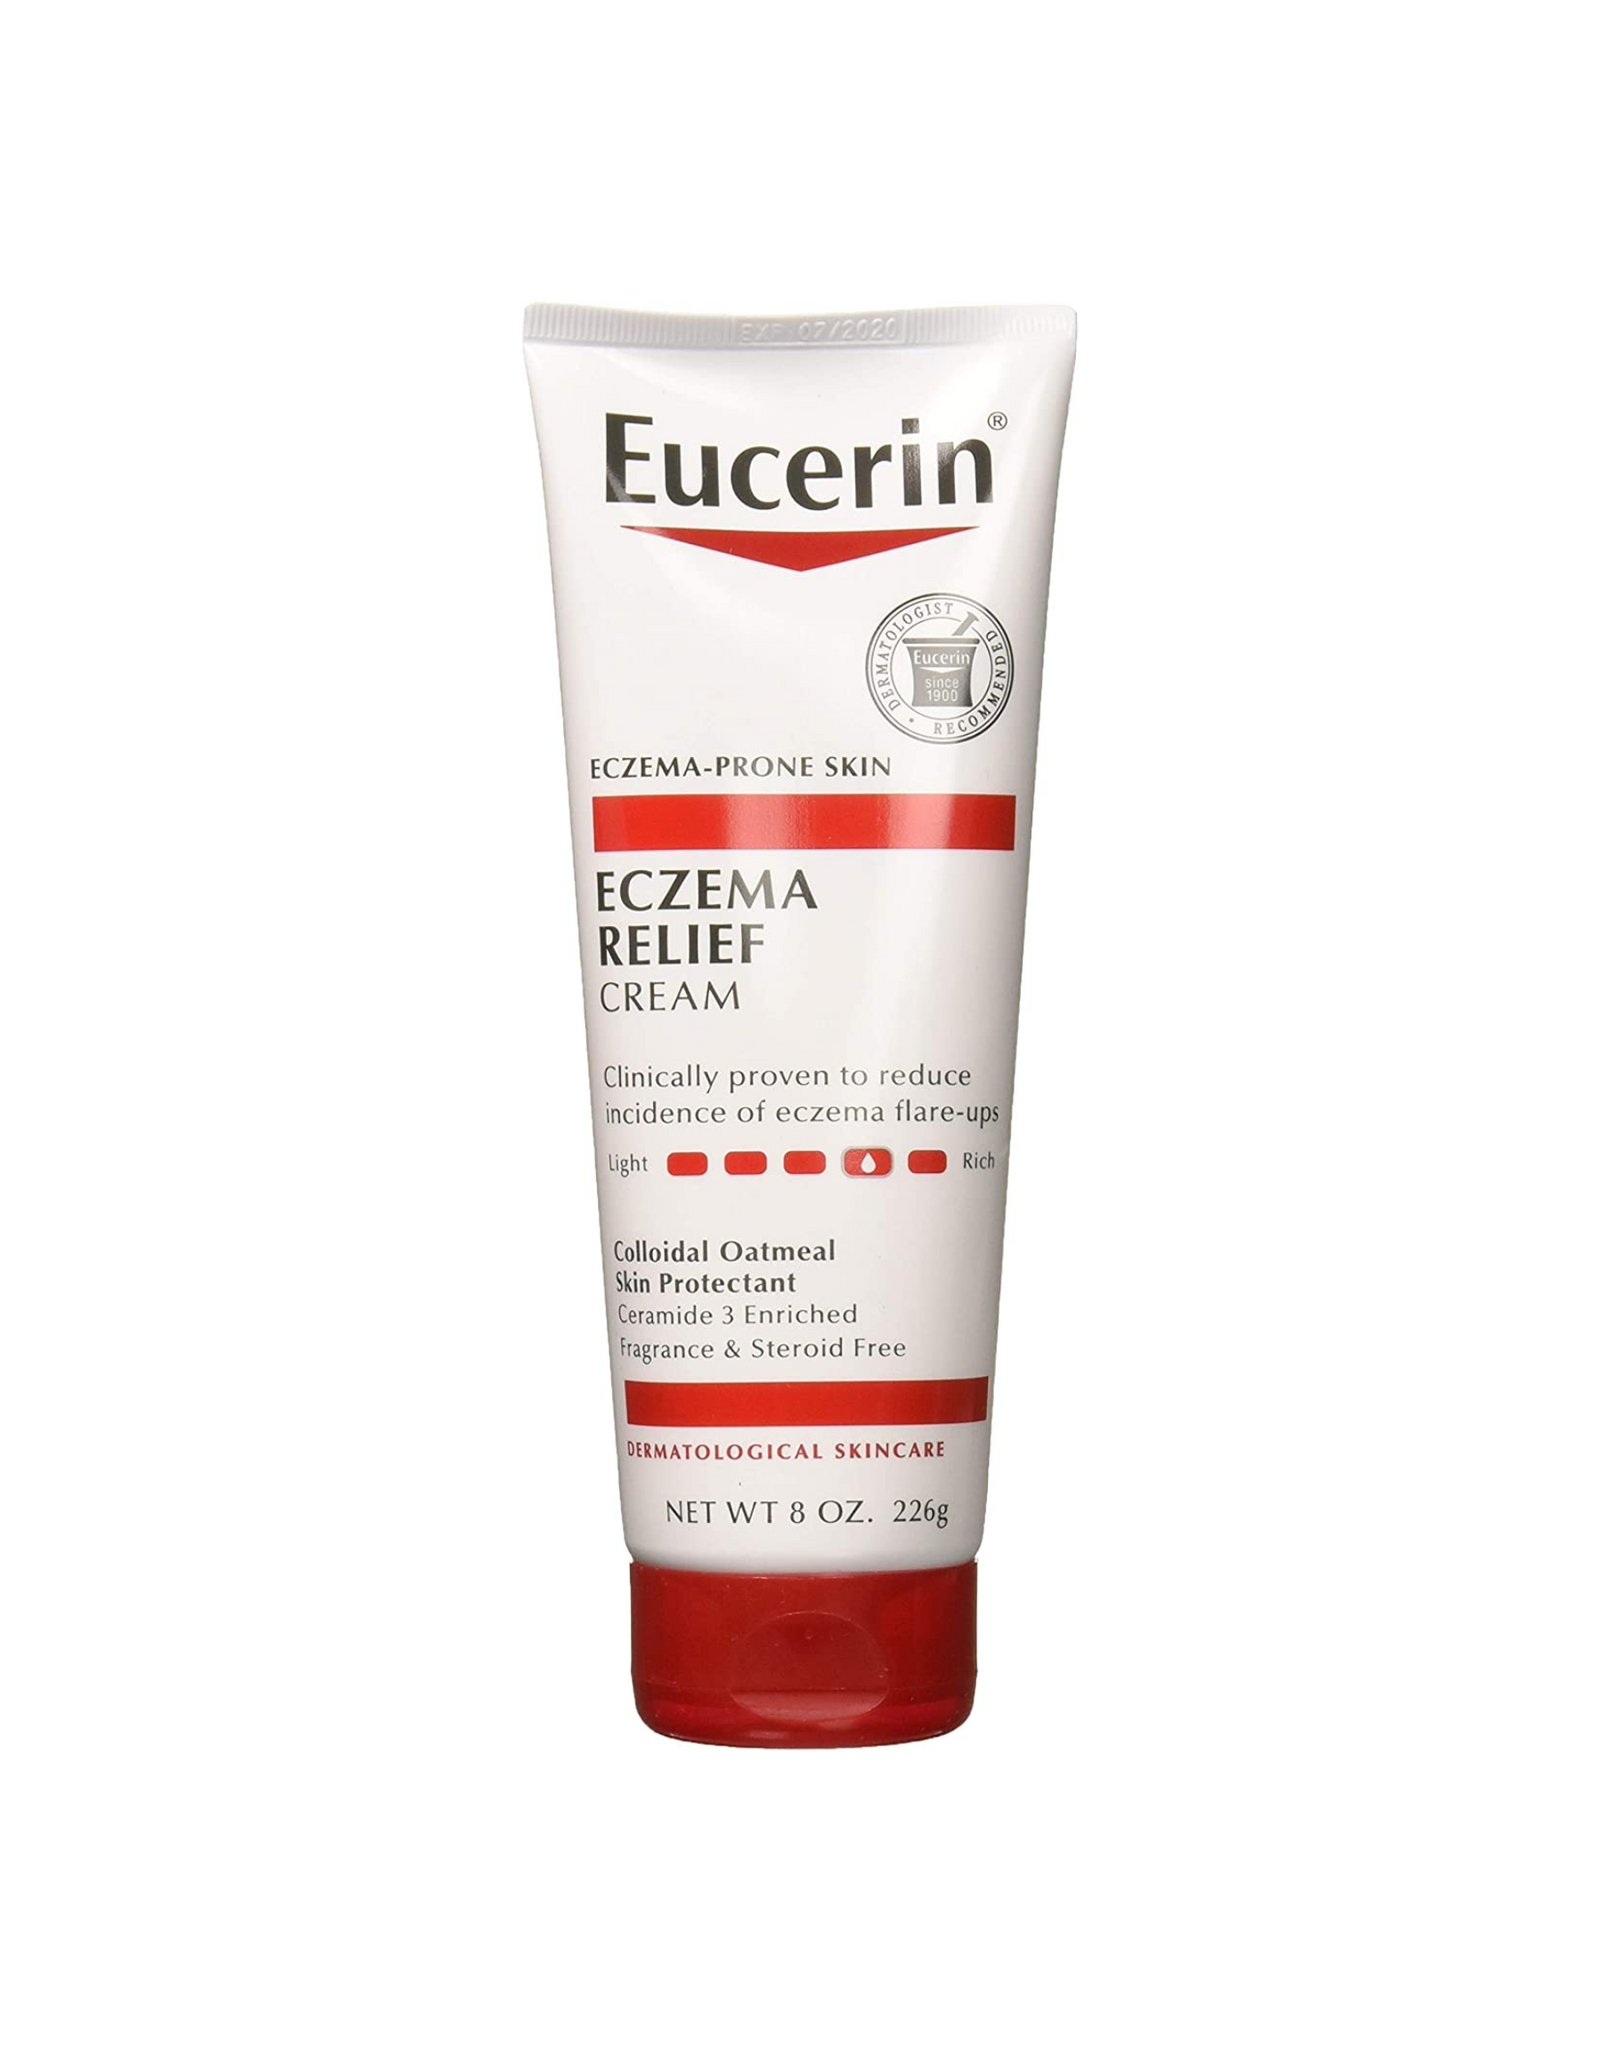 Eucerin Creme Eczema Relief 8 Ounce Tube, 8 Oz (2 Pack)